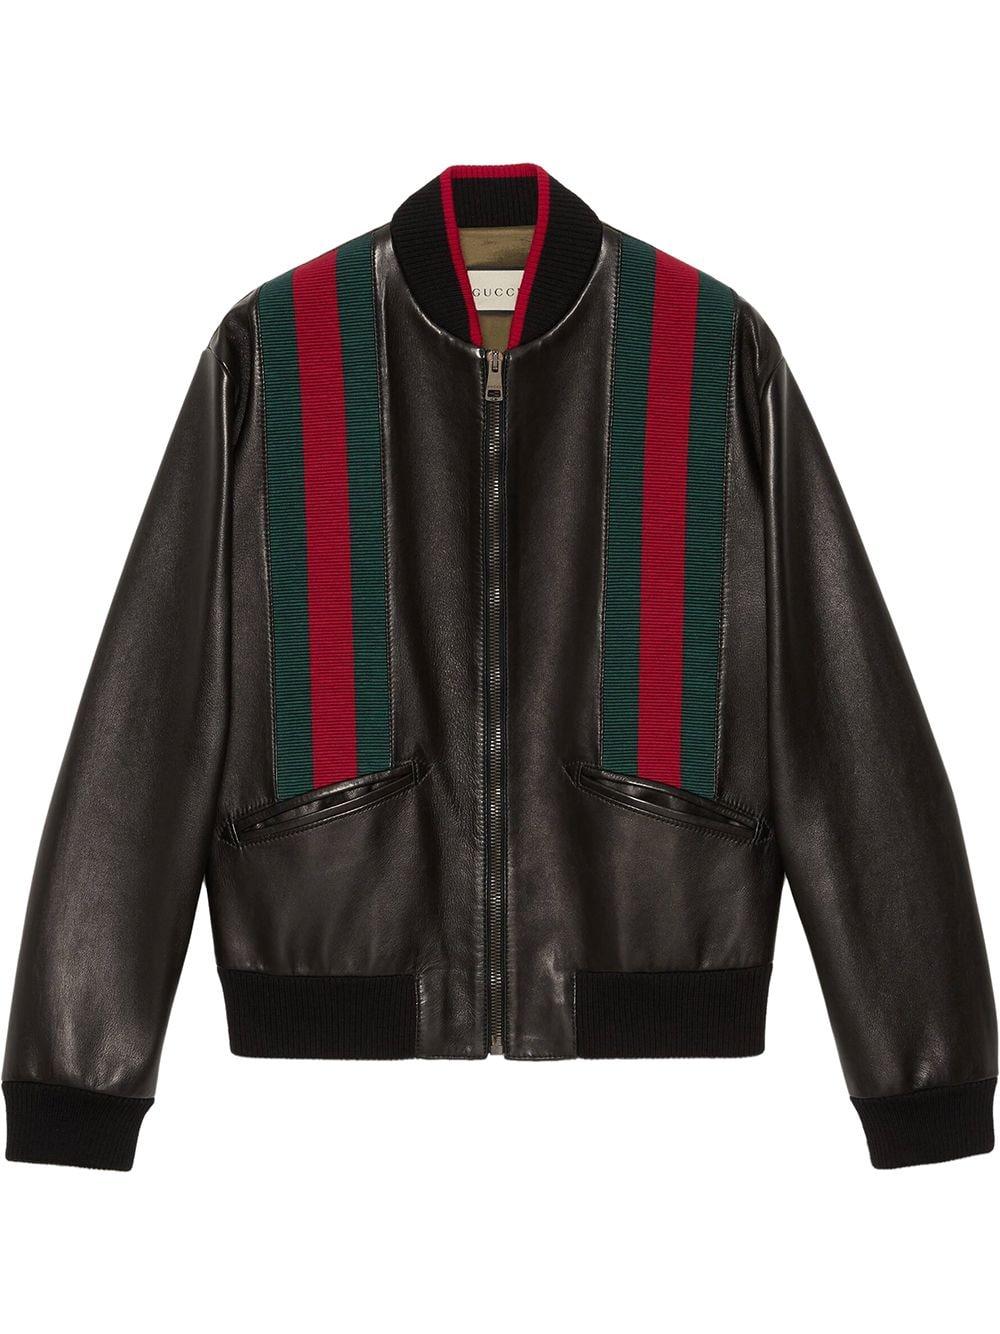 Gucci Leather Bomber Jacket With Web in Black for Men